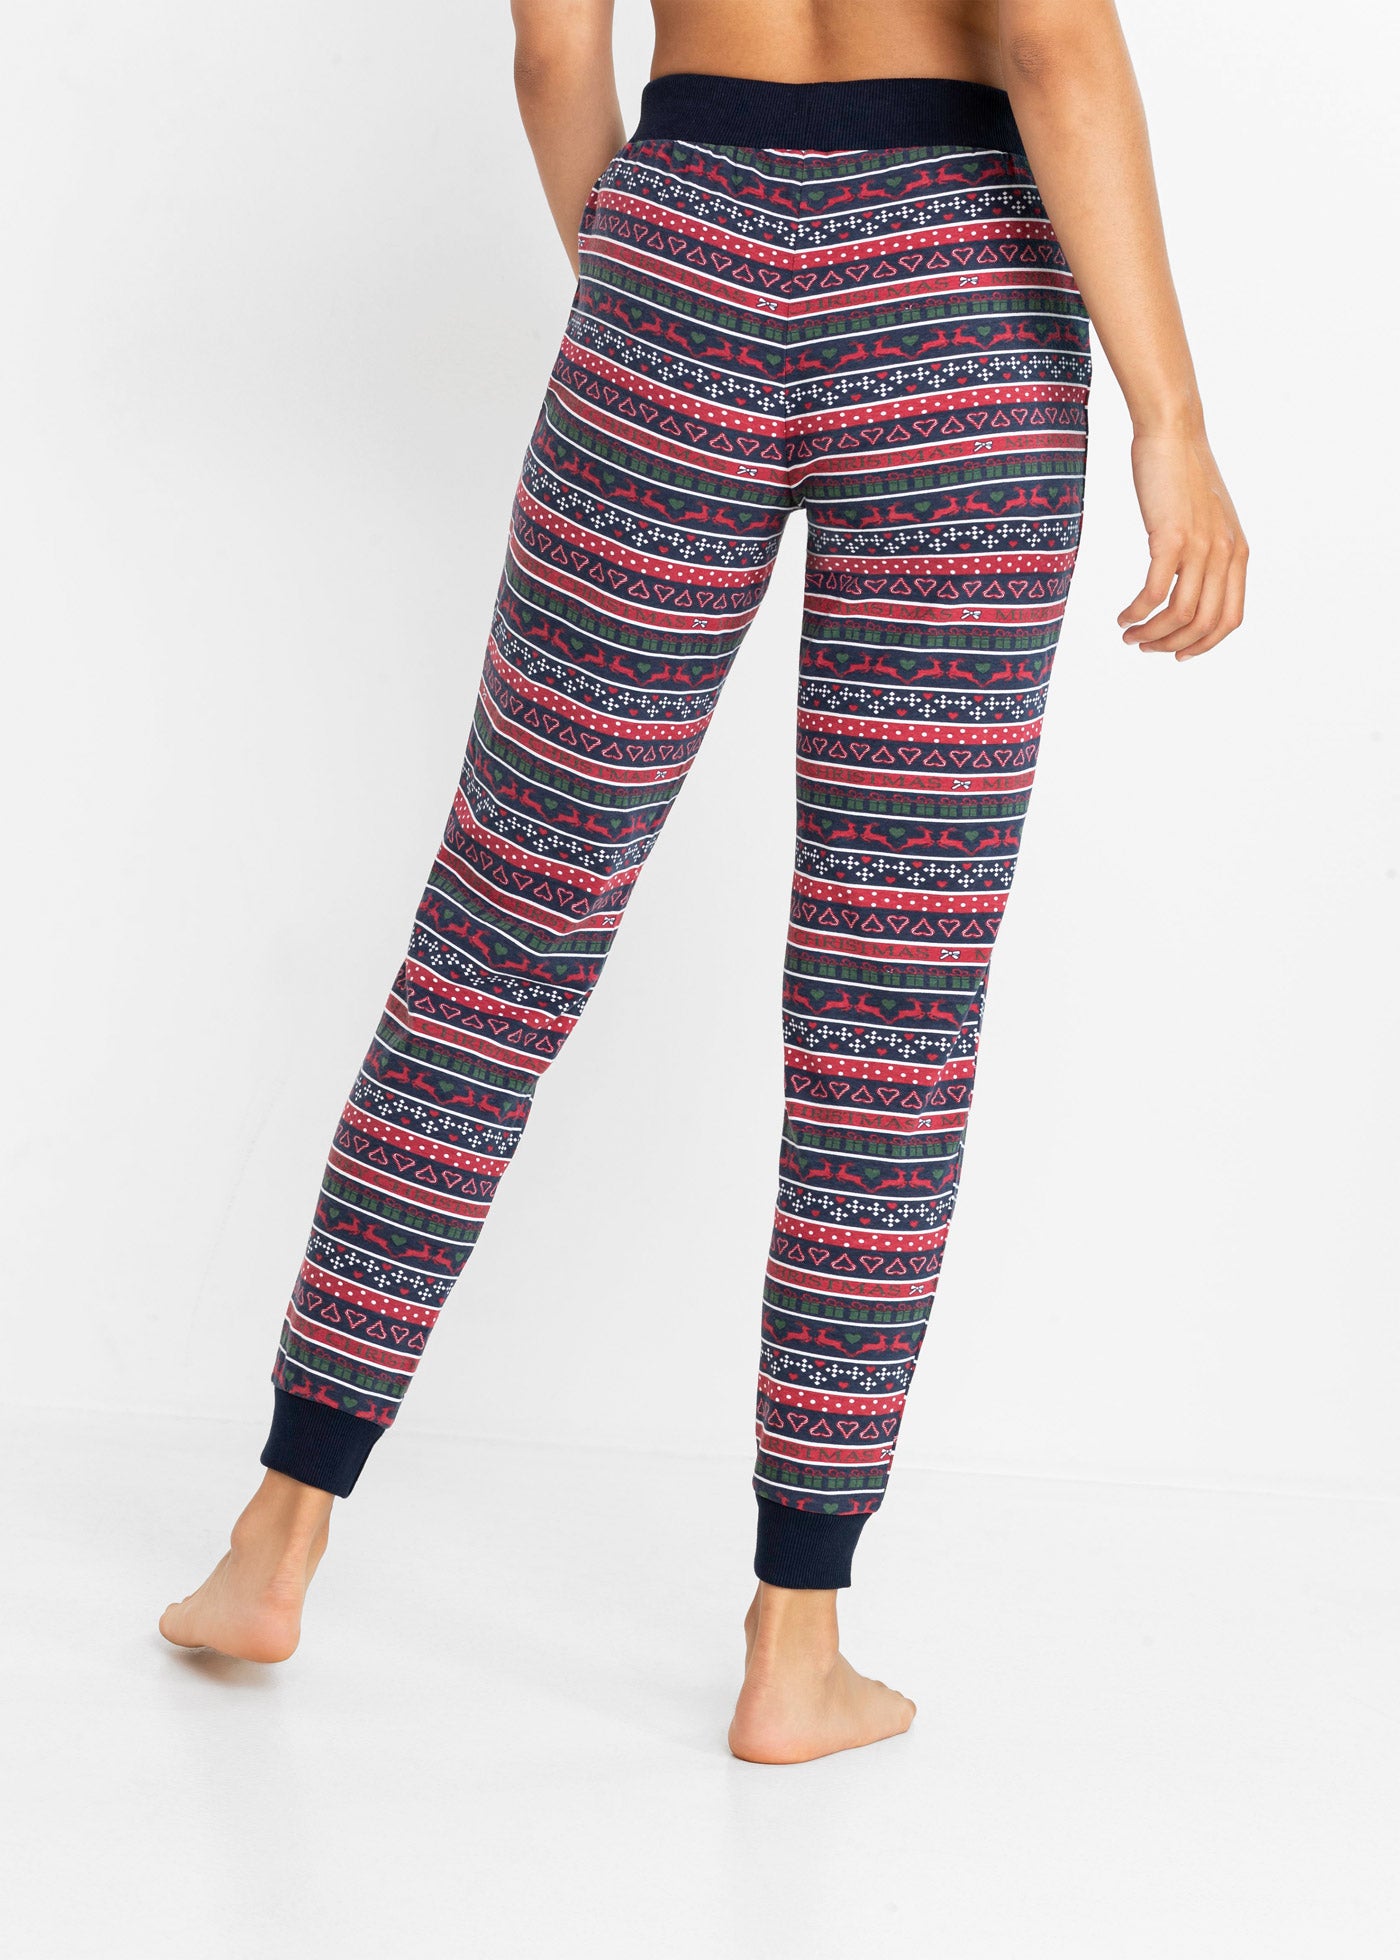 PRETTYGARDEN Soft Lounge Pants Are Even Cozier Than They Look